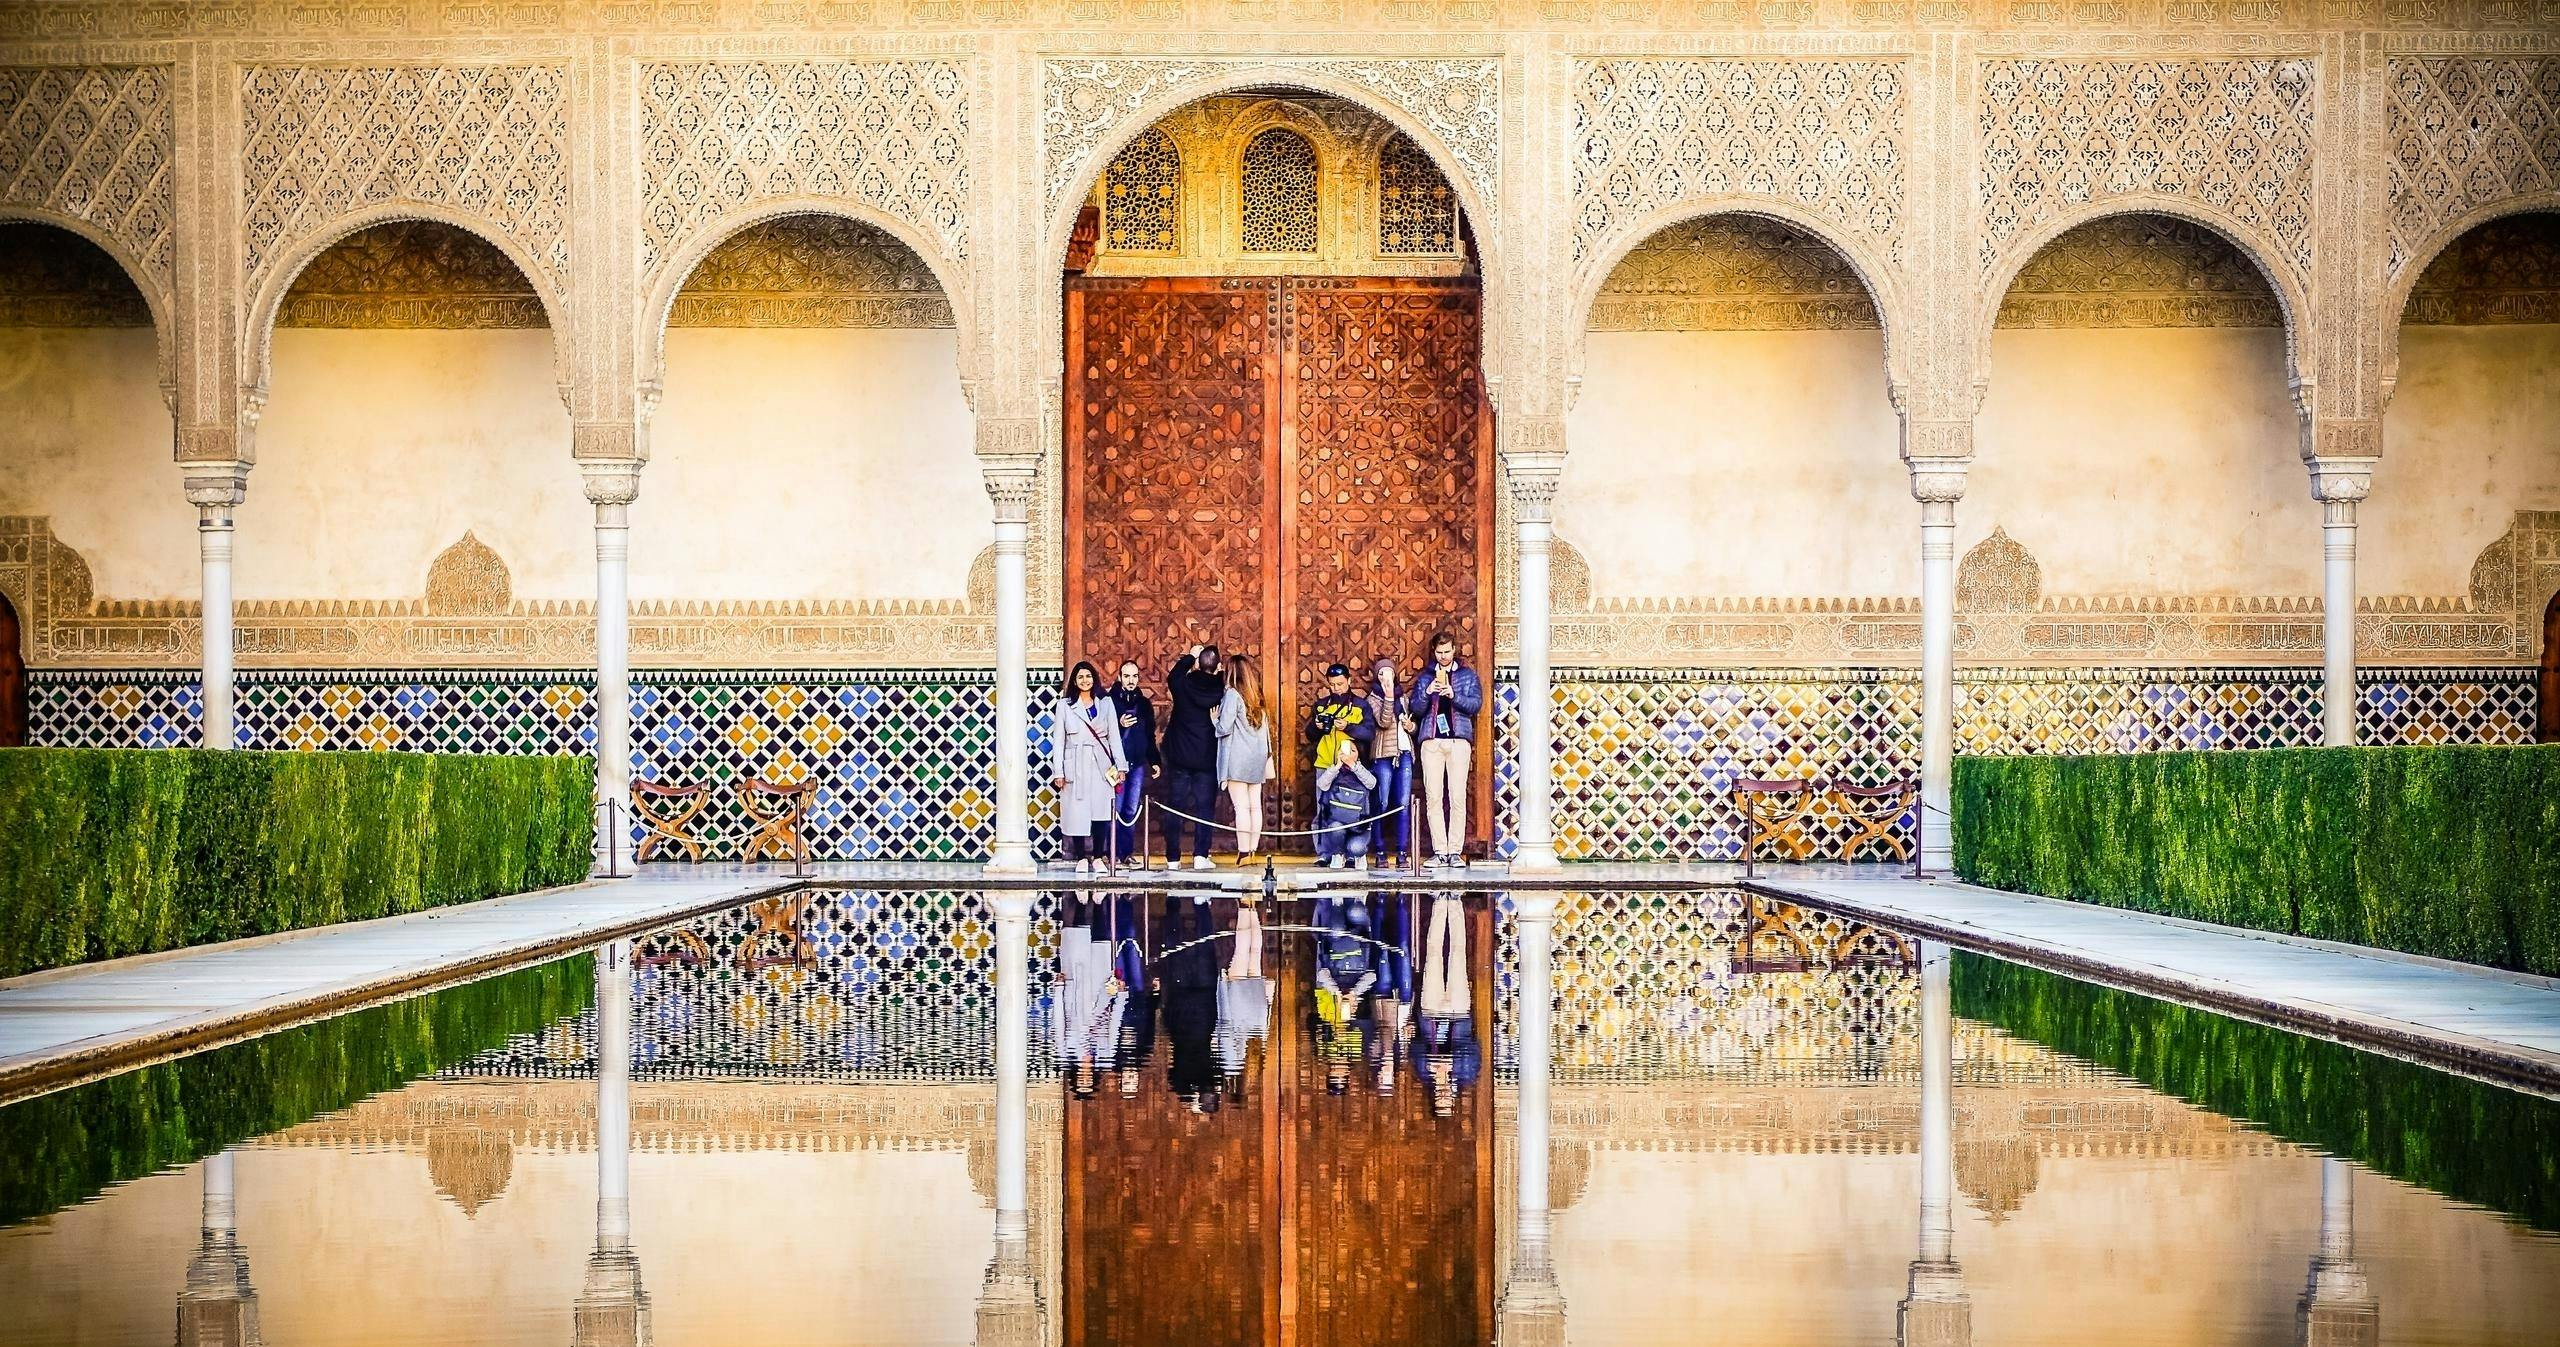 Alhambra of Granada entrance tickets and guided visit